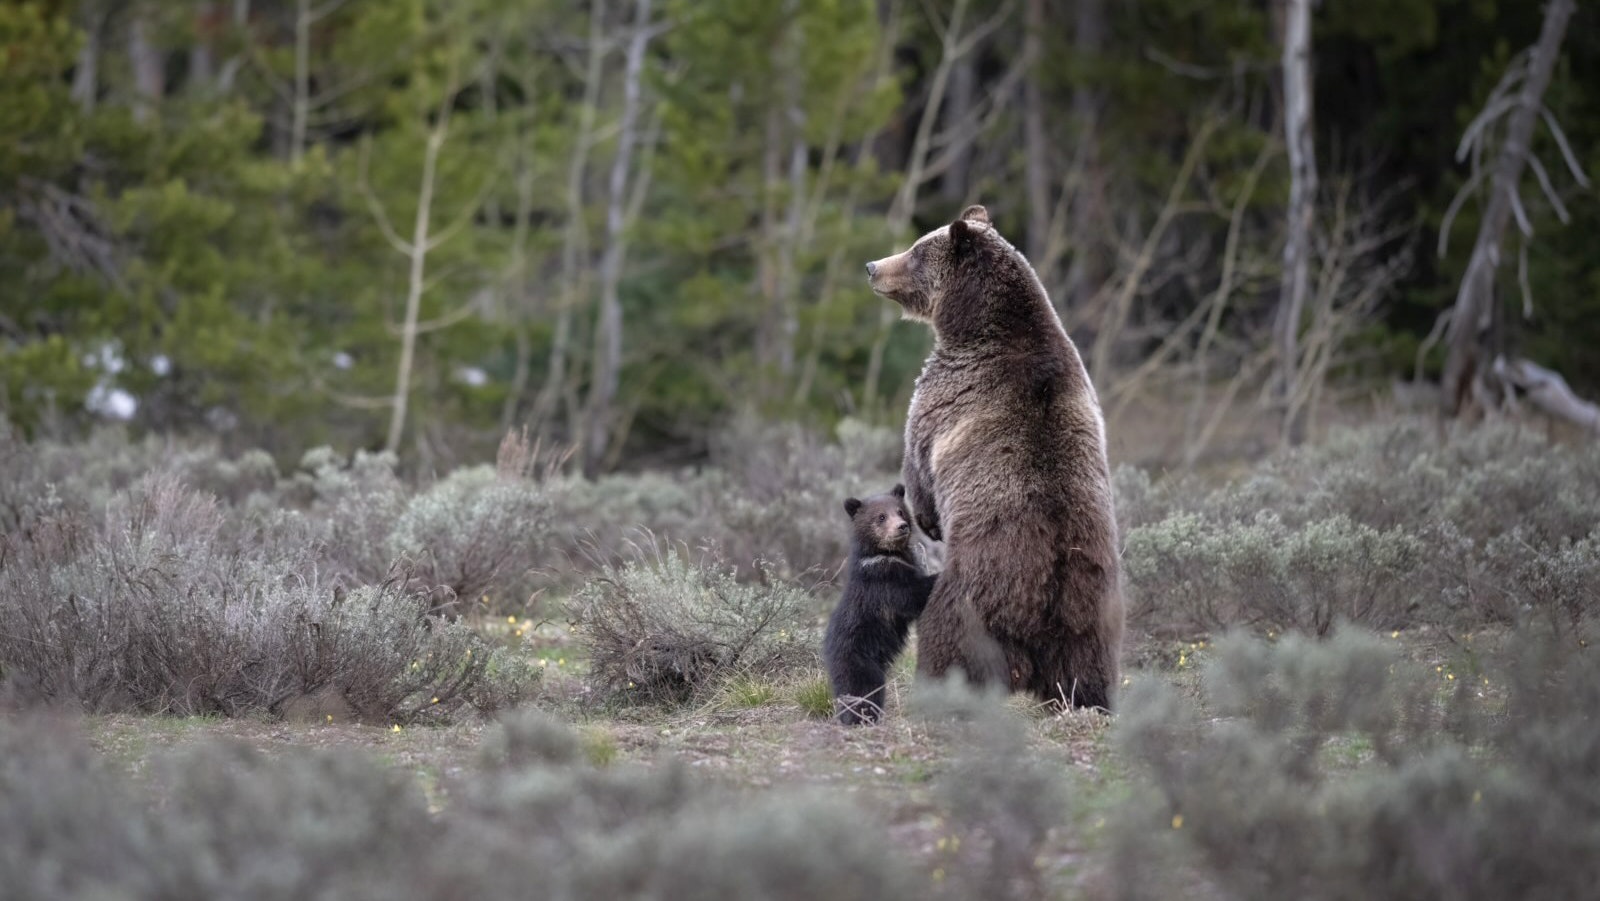 Grizzly 399 stands next to her not-yet-named cub. (Photo is owned by Savannah Rose and may not be reproduced)